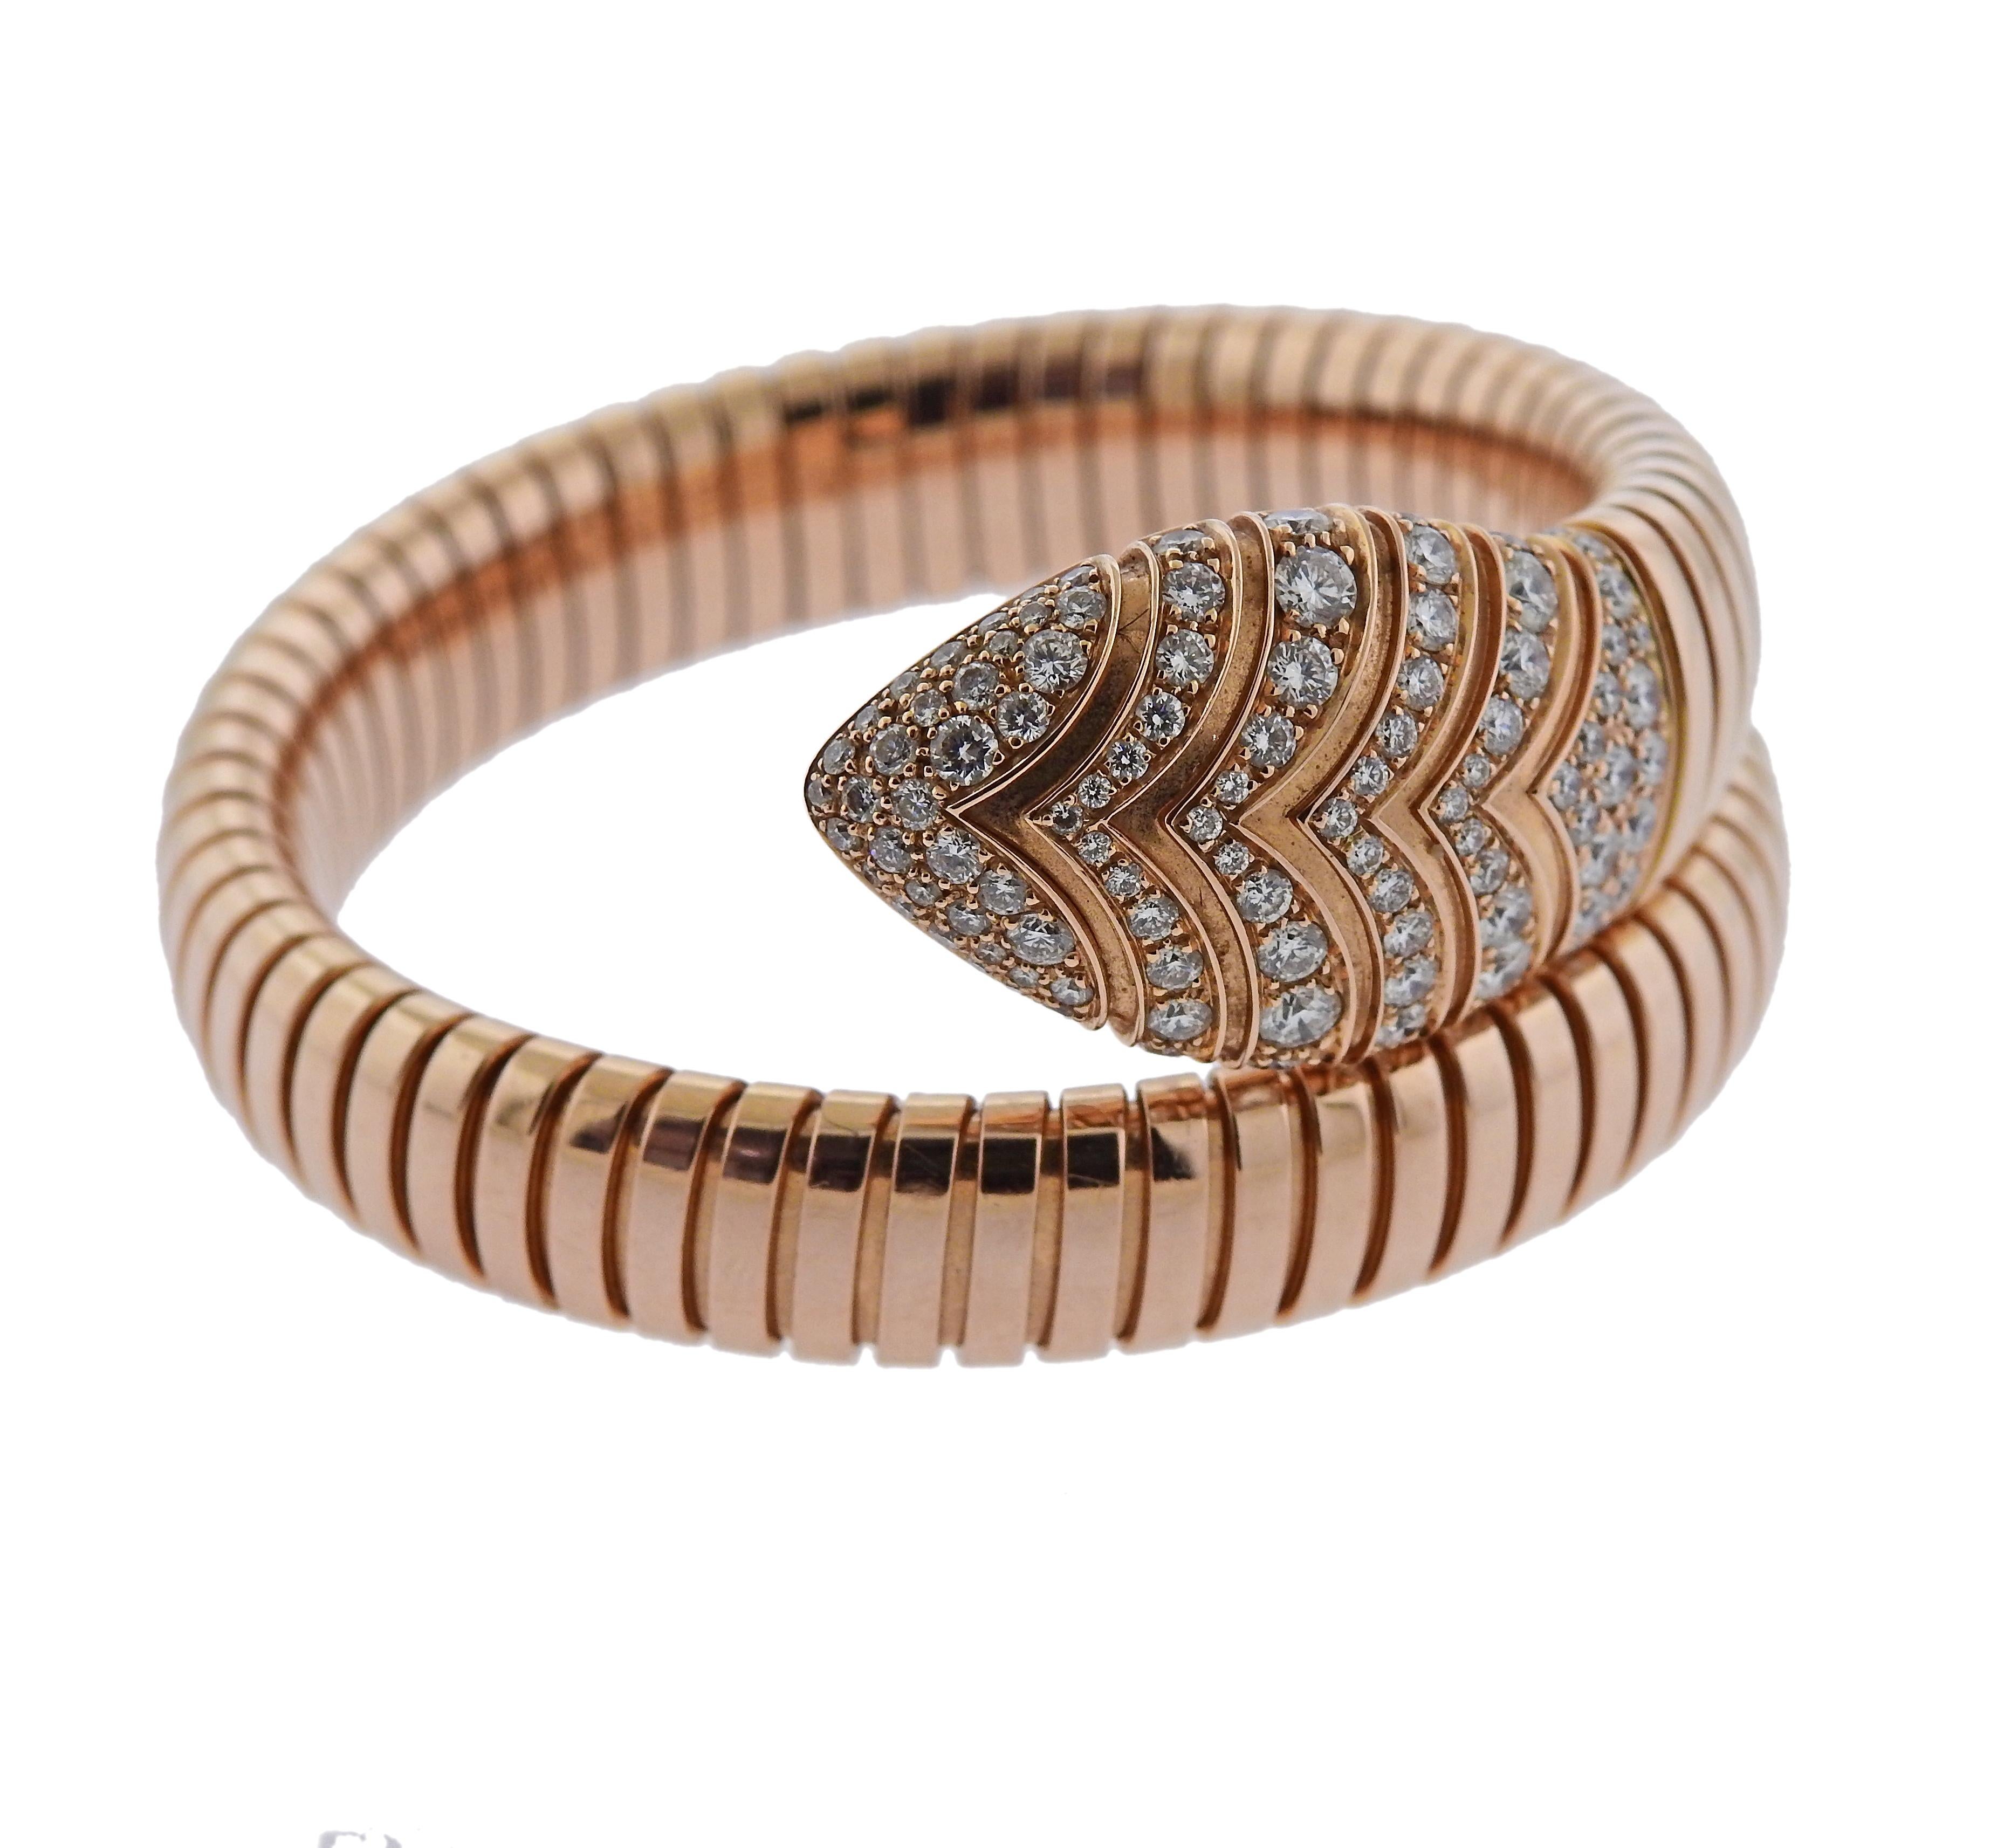 Impressive 18k rose gold wrap bracelet, crafted by Bvlgari for Serpenti collection. Adorned with approx. 3.29ctw in G/VS diamonds. Retail $36500, comes with Box and COA. Bracelet will fit approx. 7